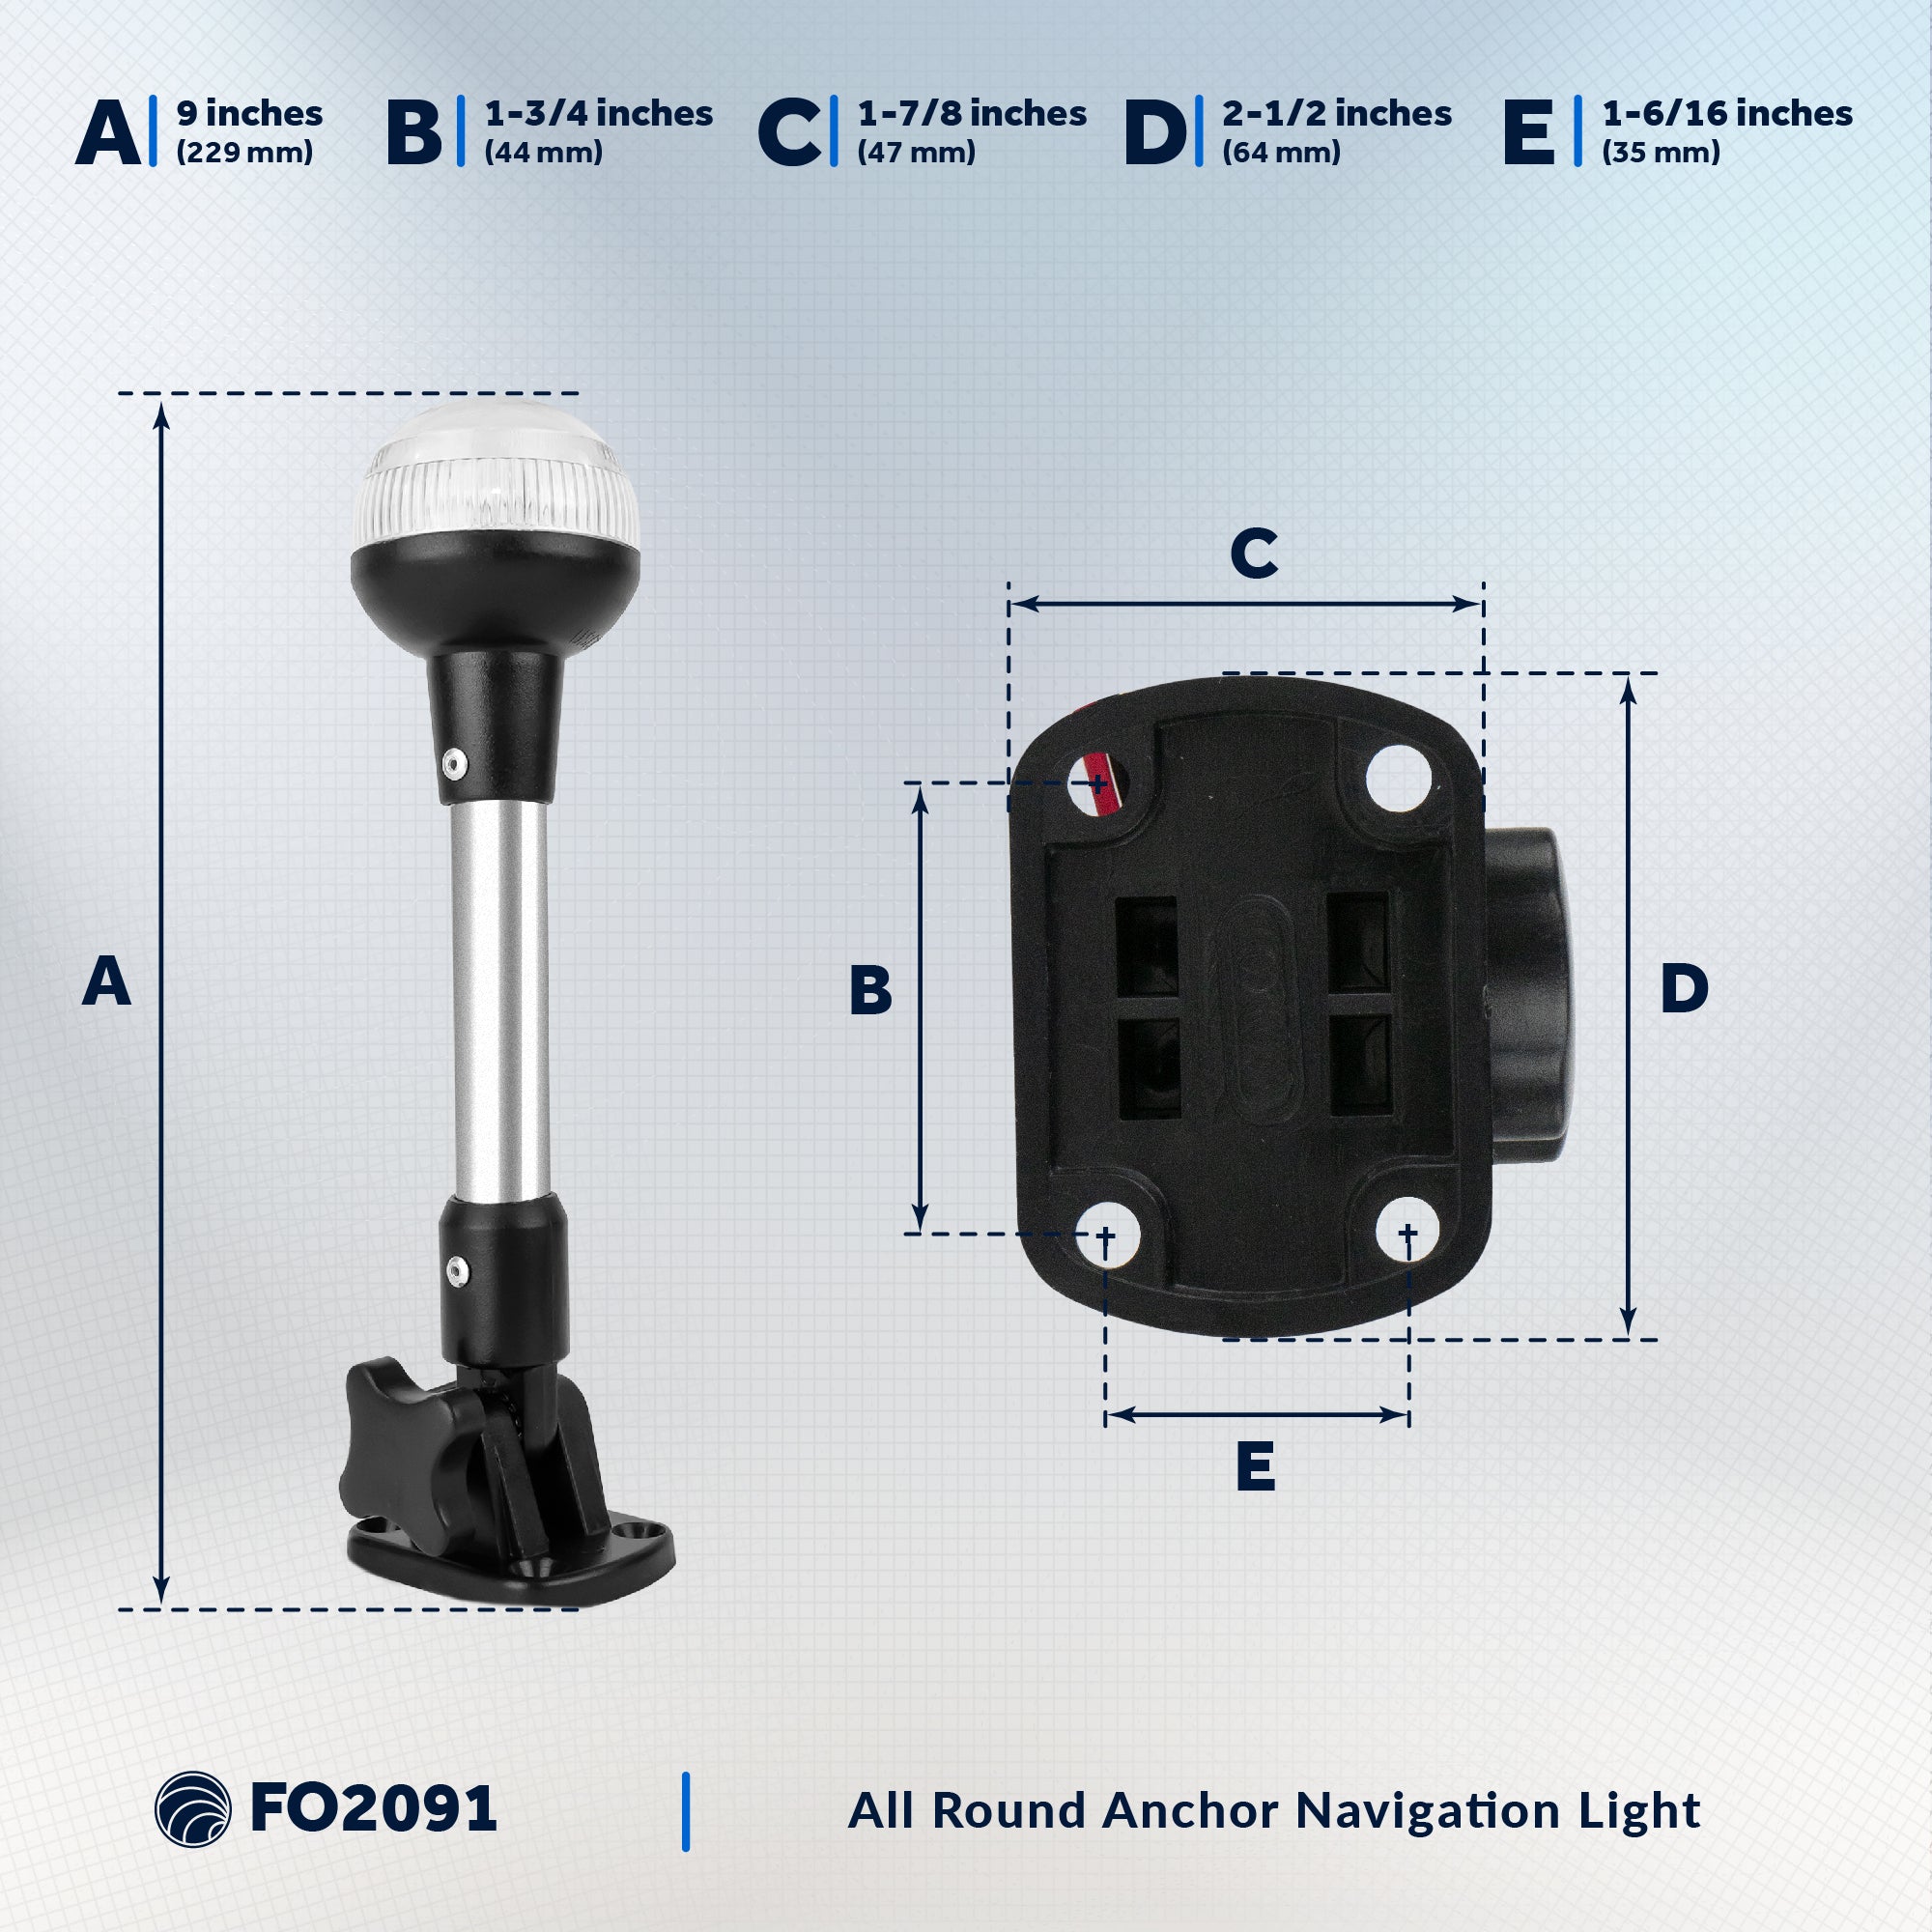 All Round Anchor Fold Down Stern Light, 9", Surface Mount - FO2091